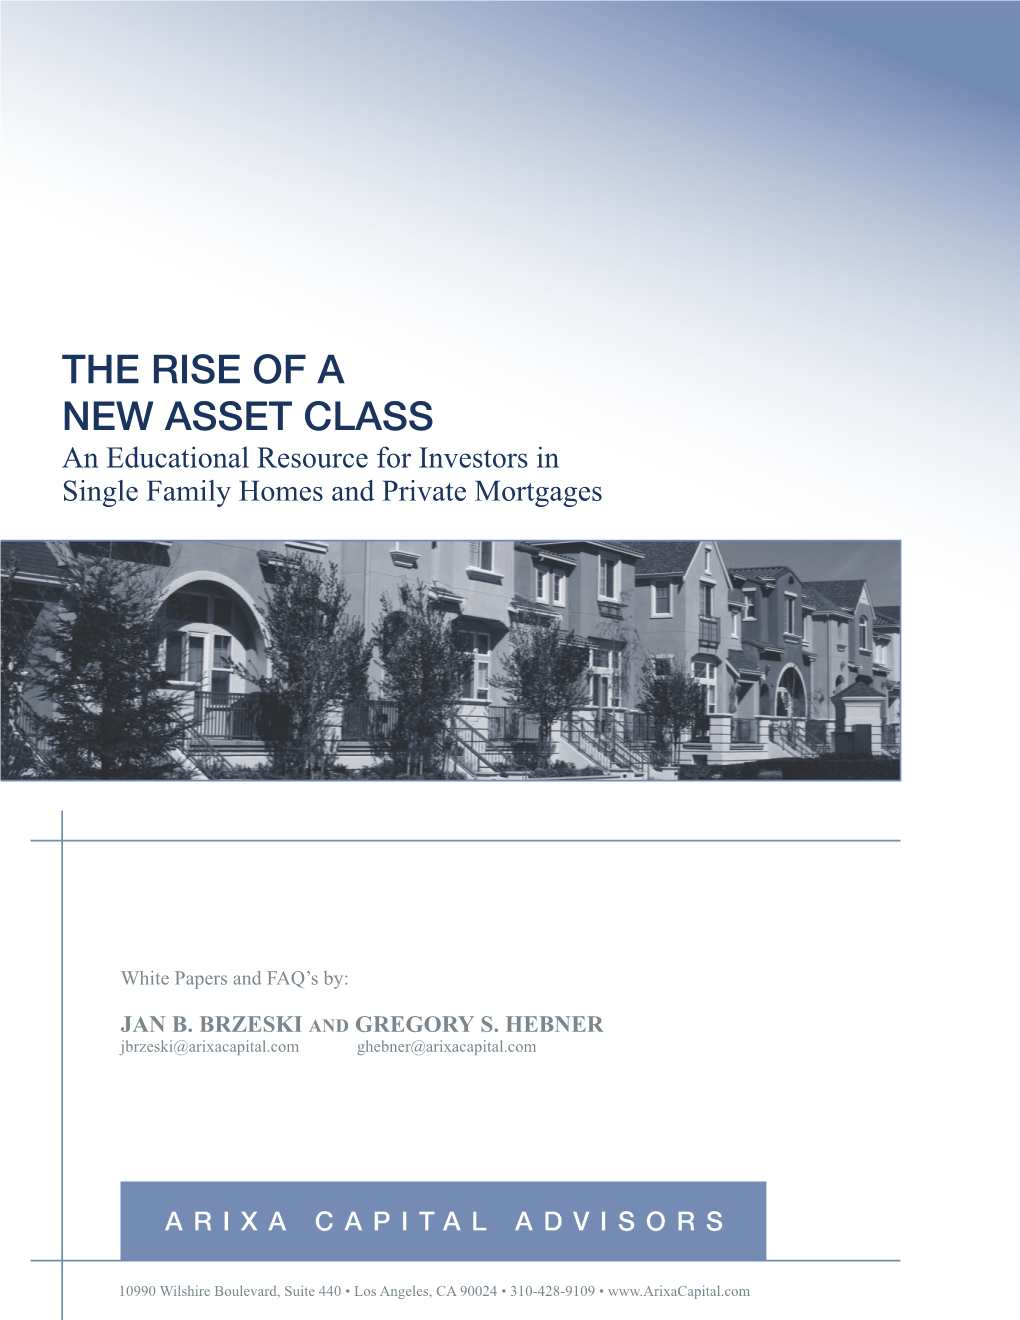 THE RISE of a NEW ASSET CLASS an Educational Resource for Investors in Single Family Homes and Private Mortgages